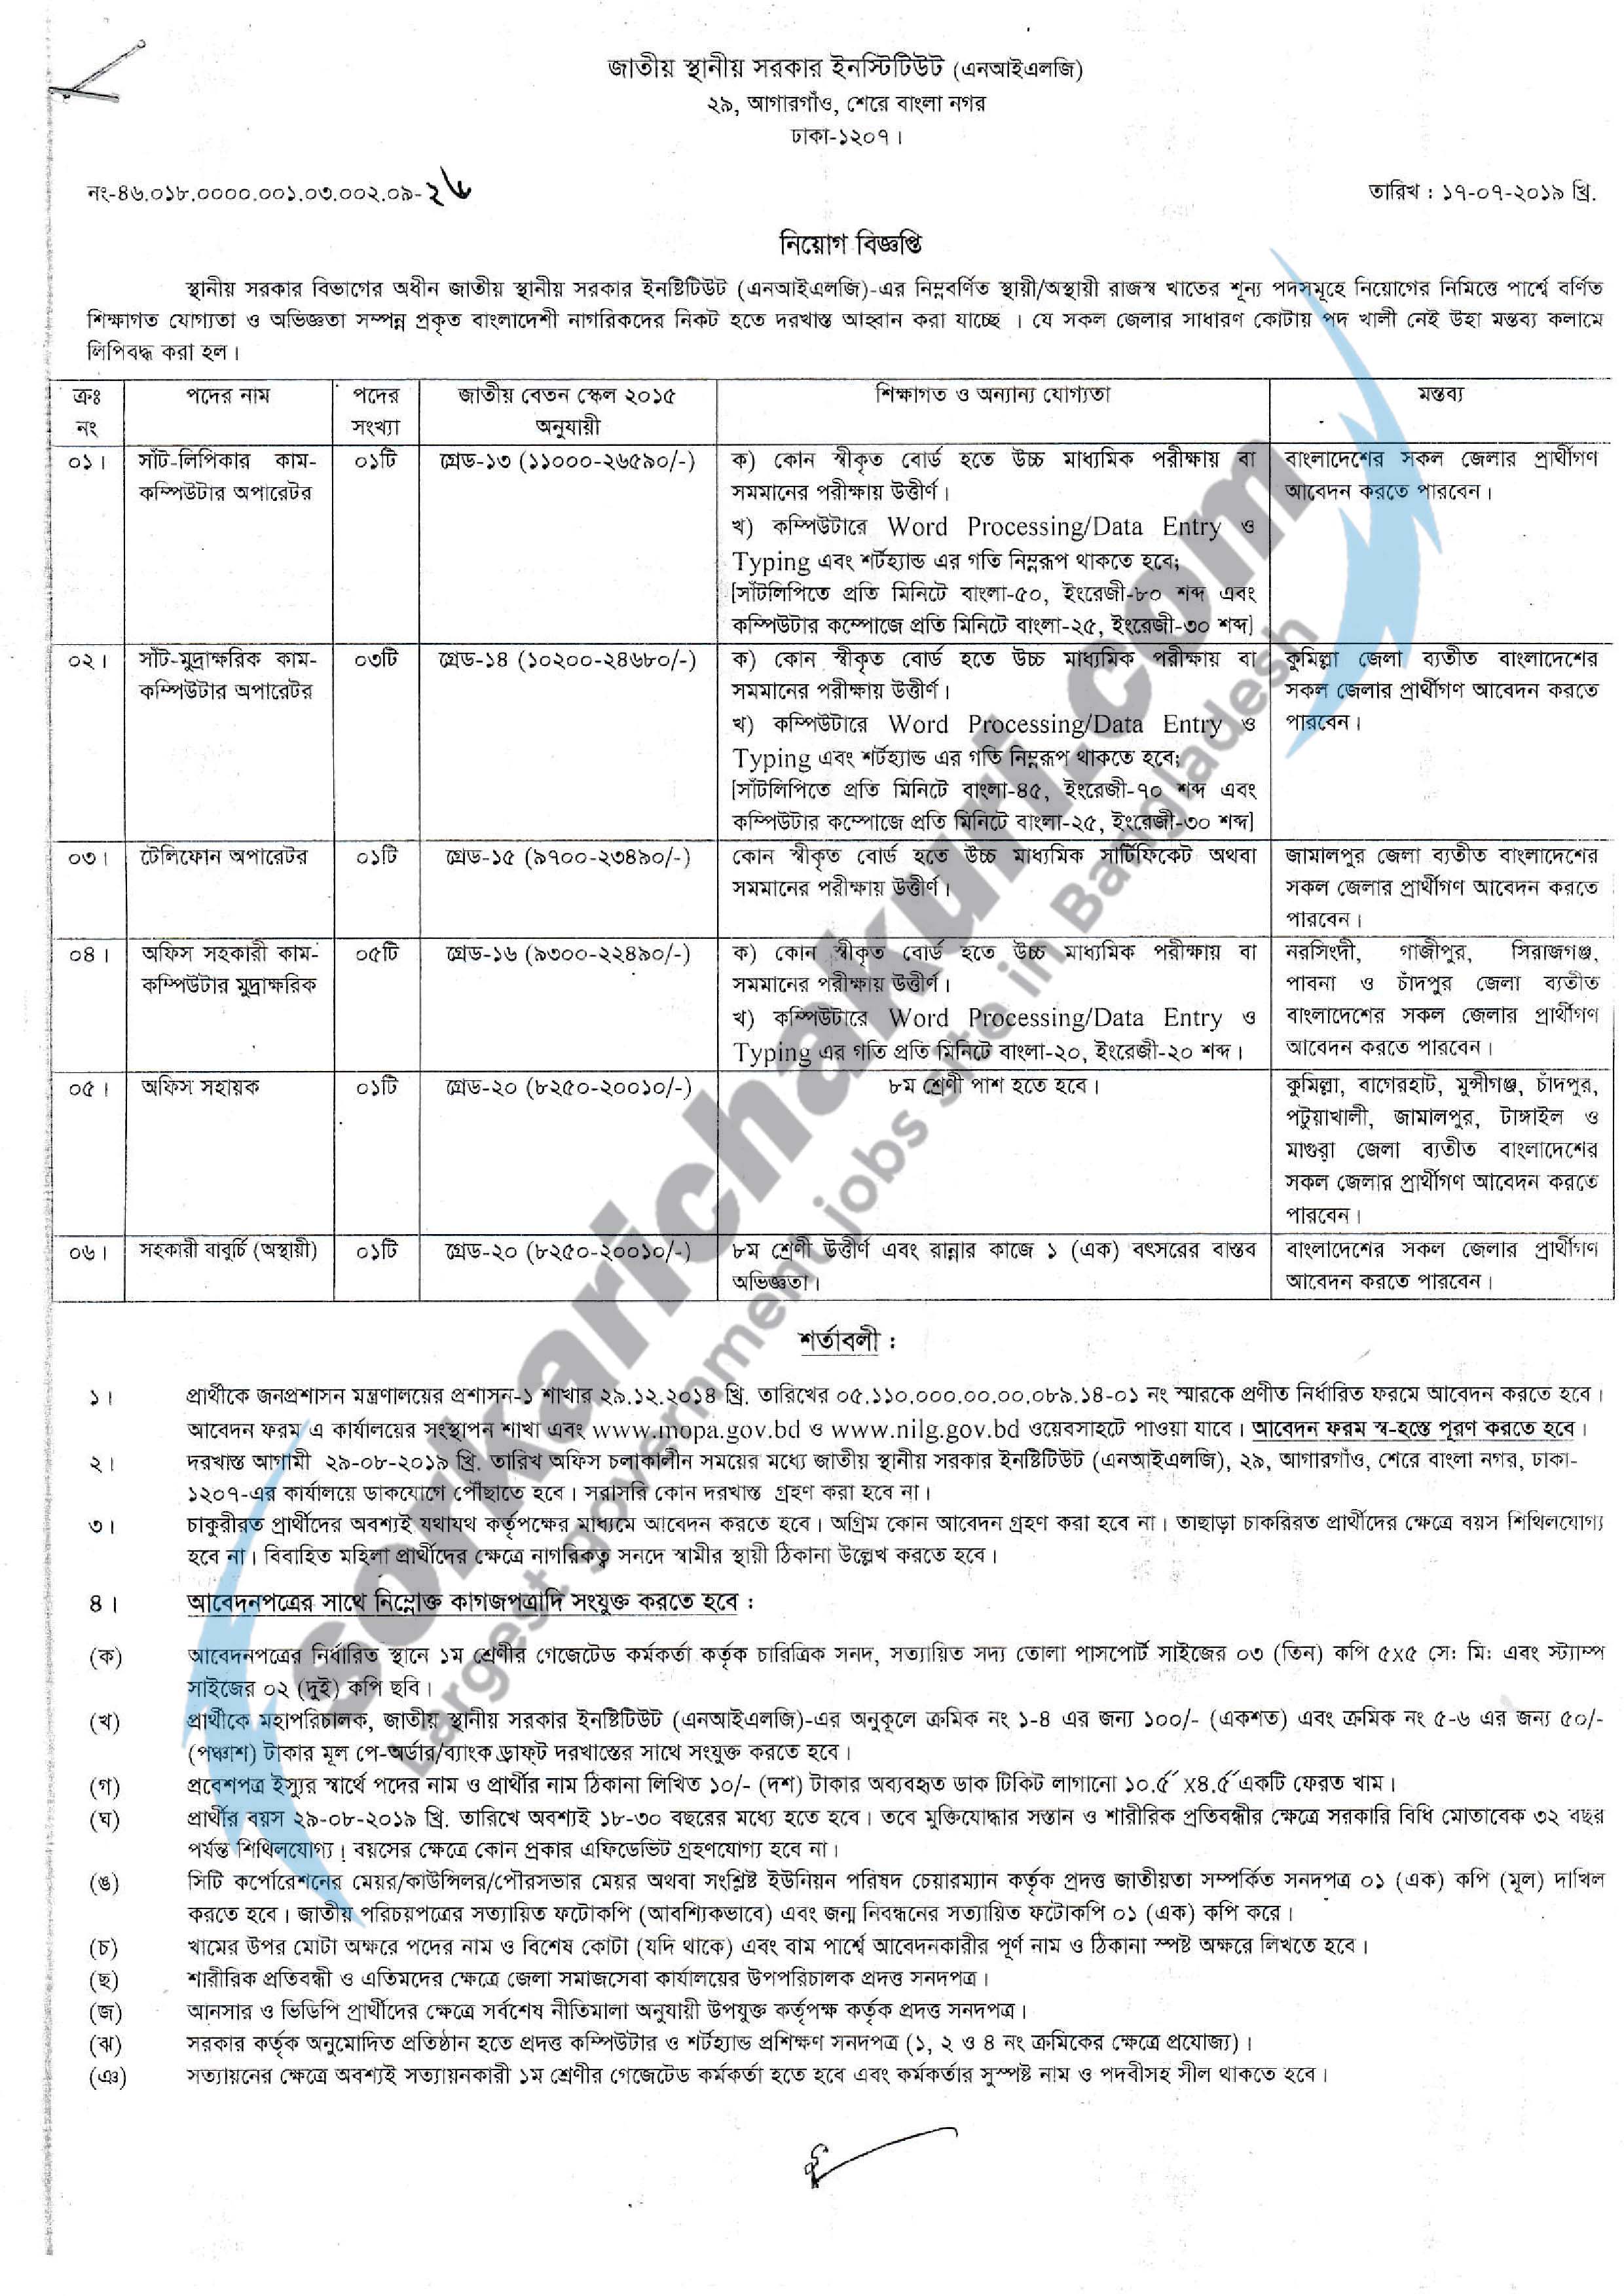 National Institute of Local Government Jobs Circular 2019